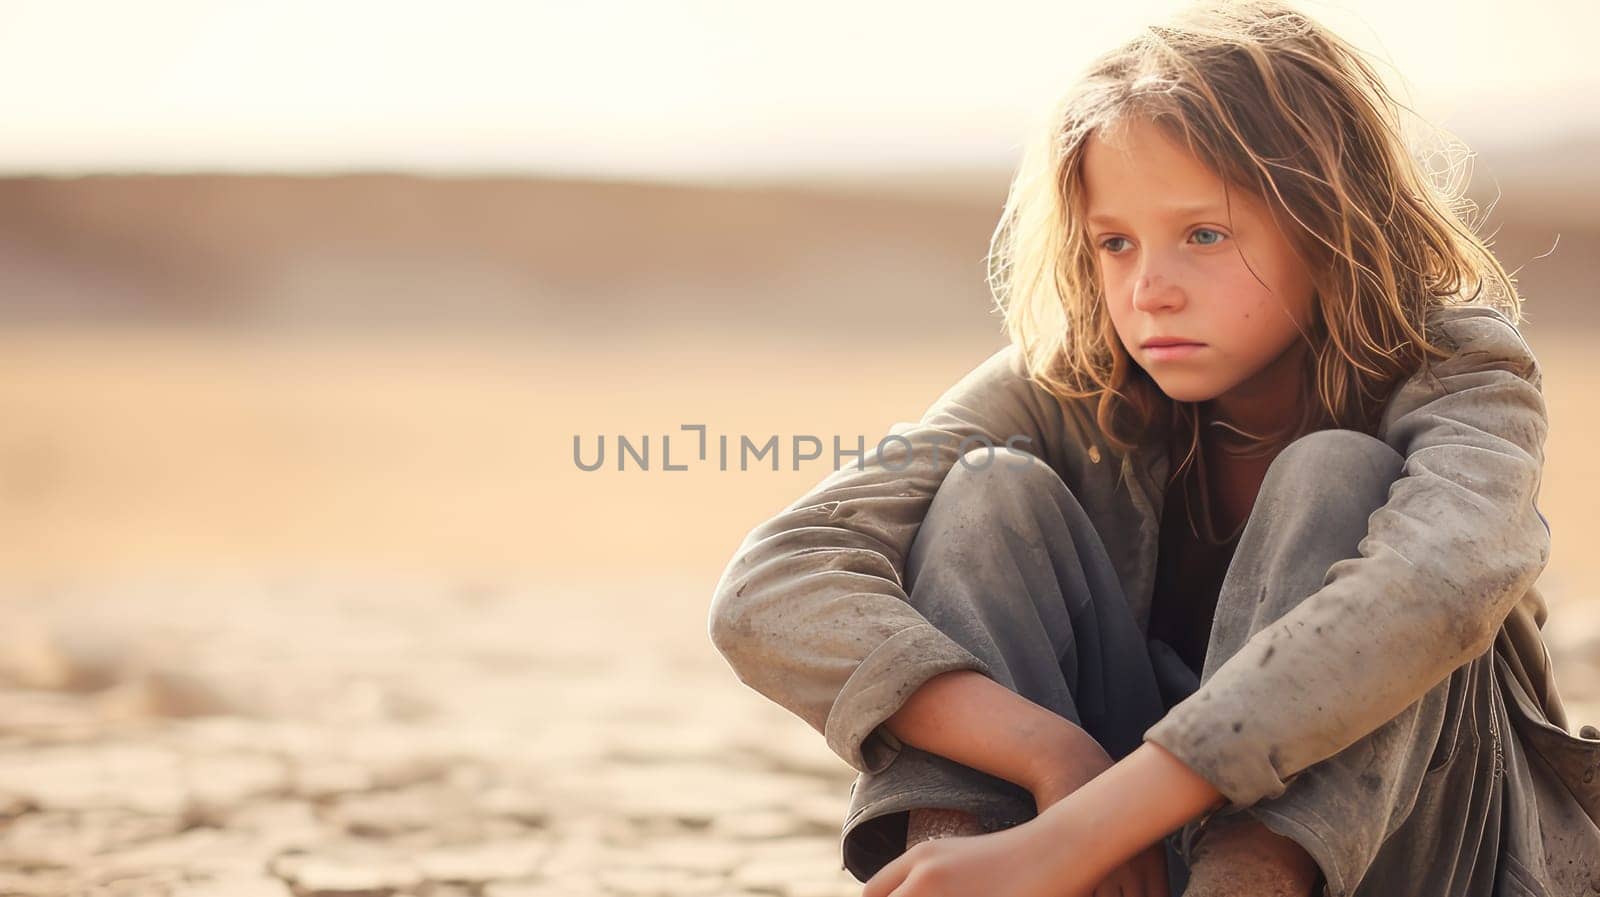 A poor, beggar, hungry, dirty Caucasian child boy, sitting on the ground cracked by drought. Water shortage on Earth due to global warming, drought, famine. Climate change, crisis environment, water crisis. Saving natural resources, planet suffers